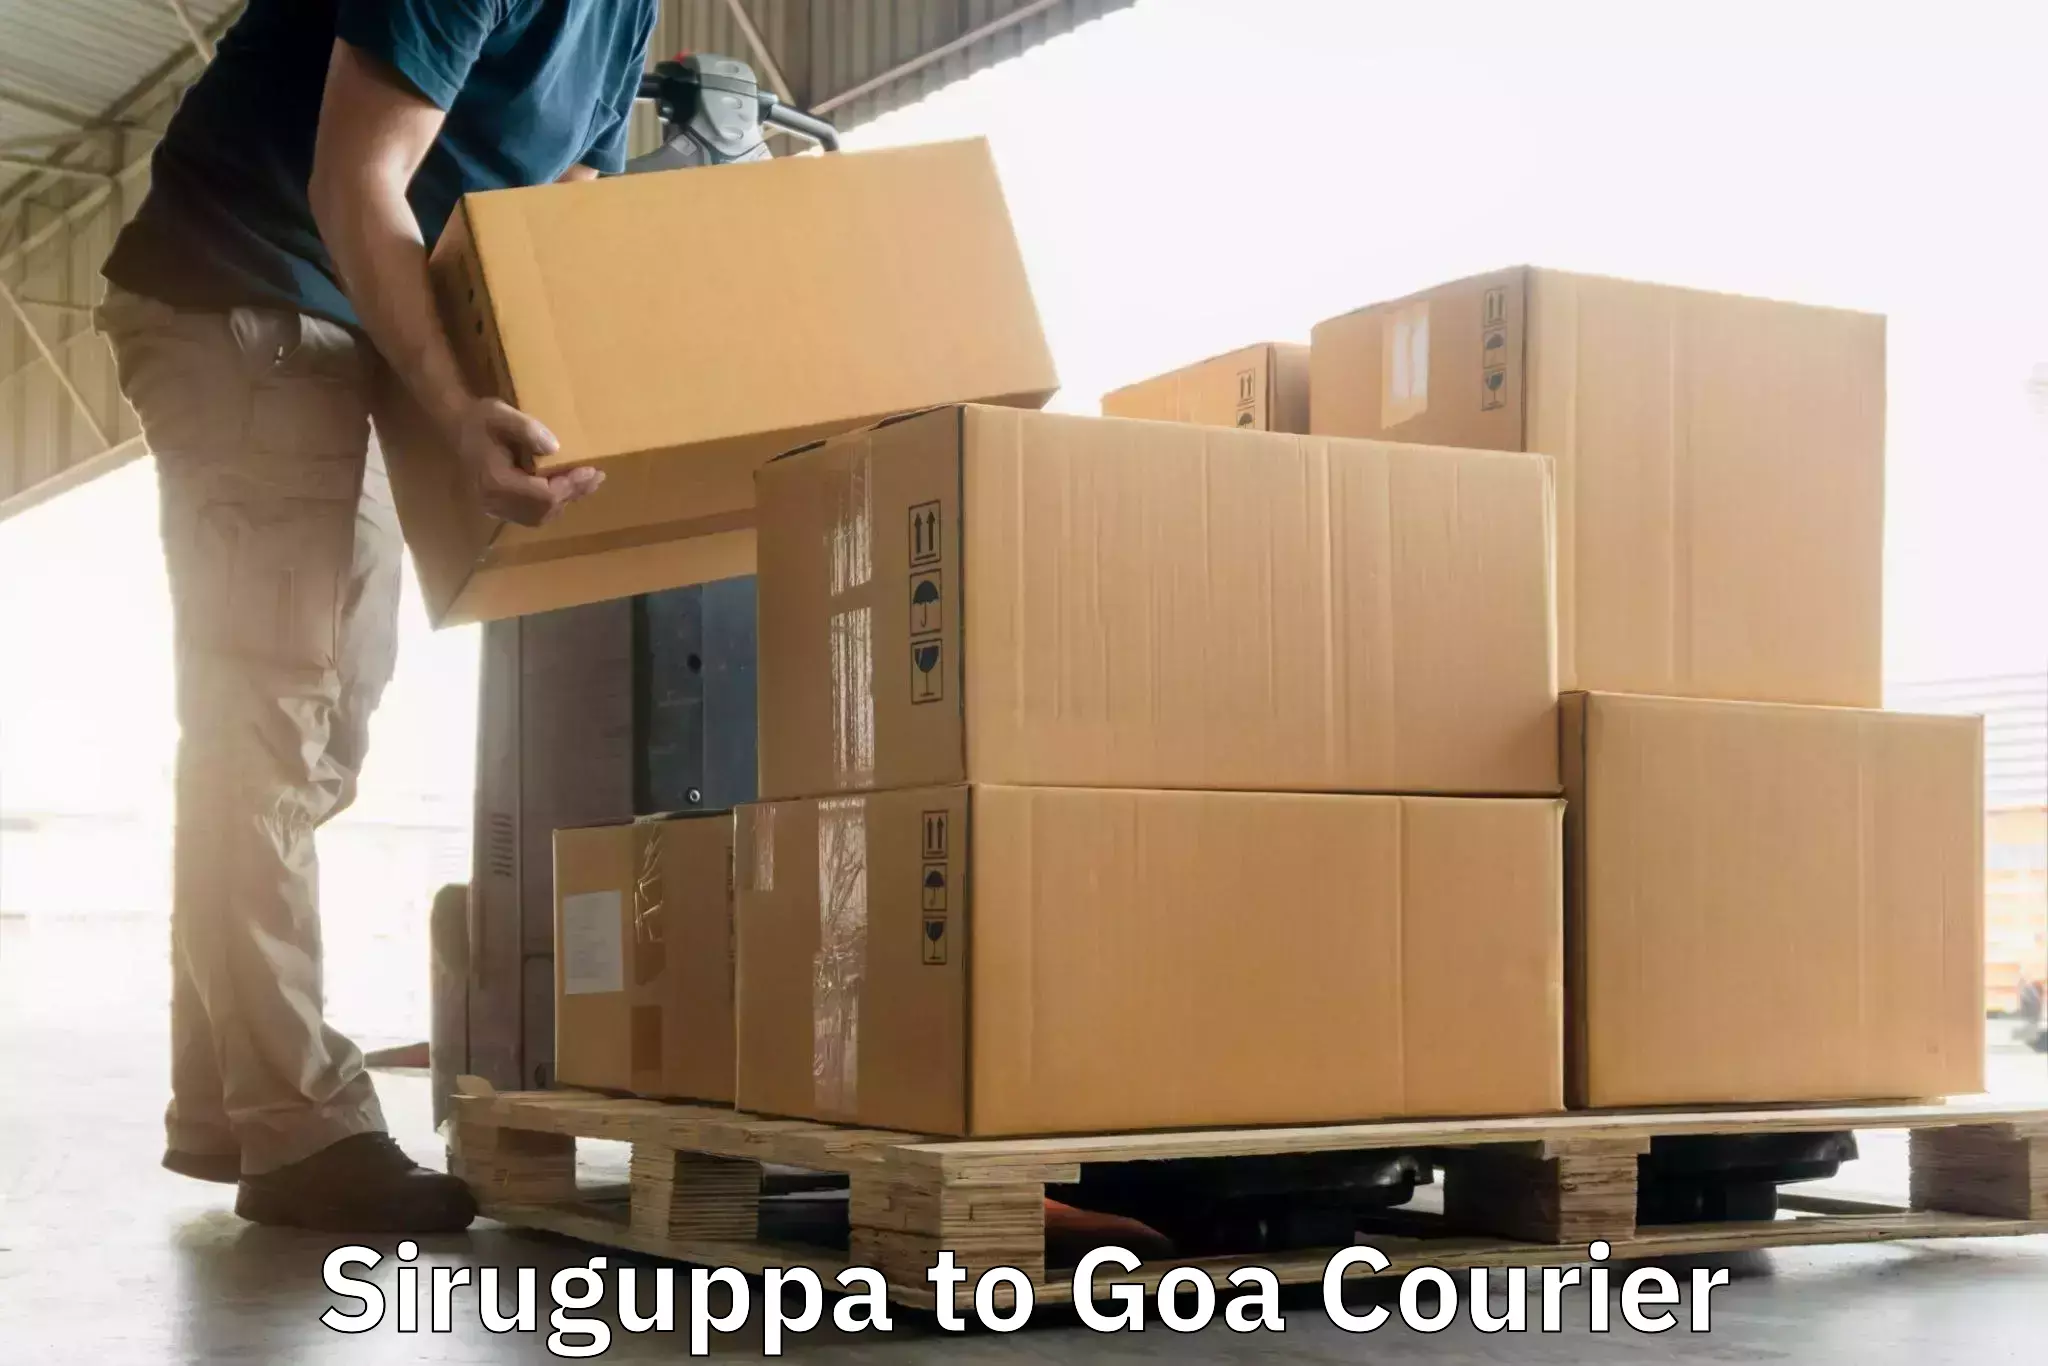 Sustainable shipping practices in Siruguppa to Goa